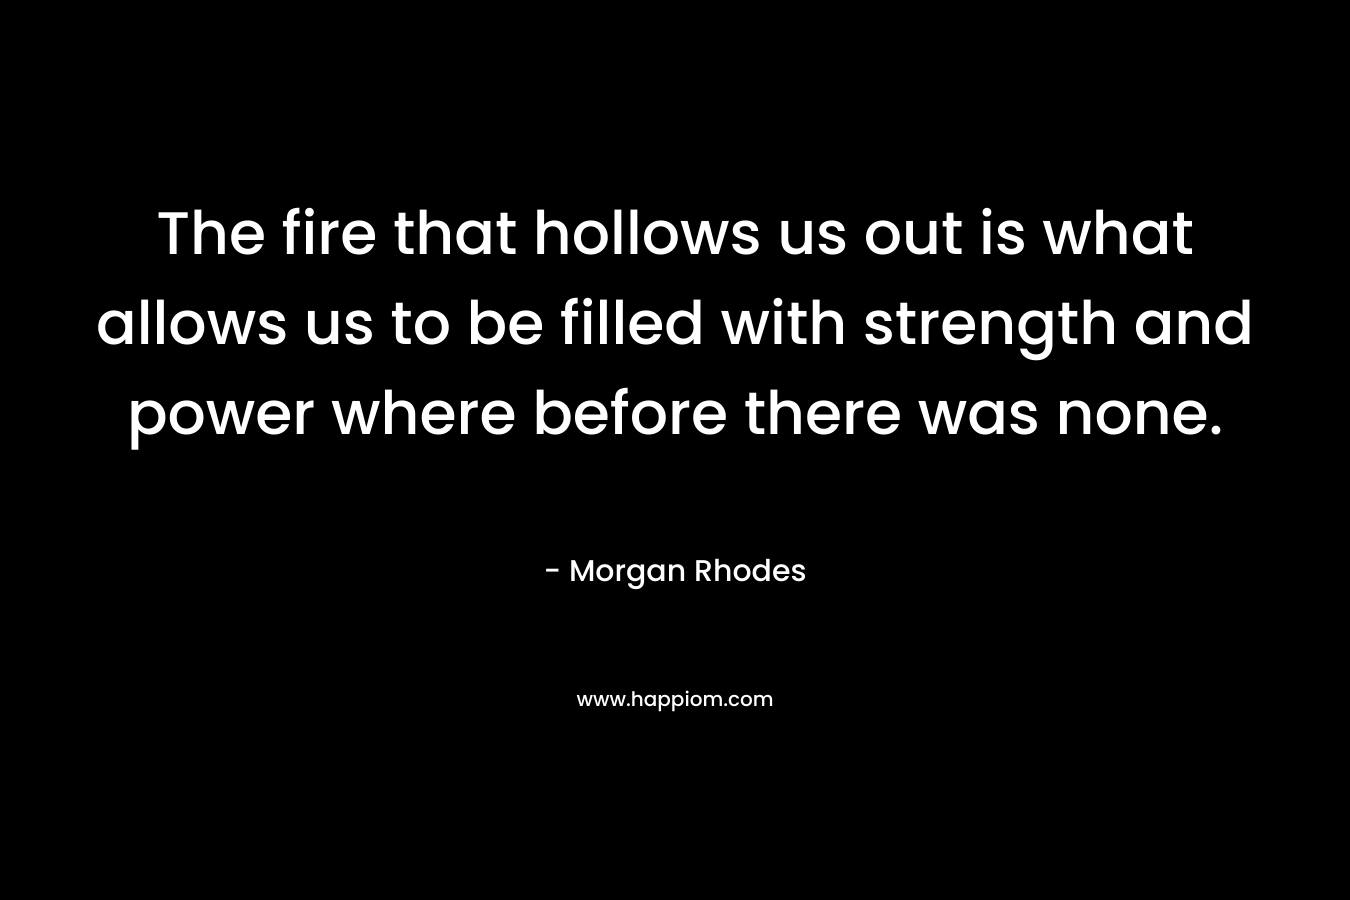 The fire that hollows us out is what allows us to be filled with strength and power where before there was none. – Morgan Rhodes